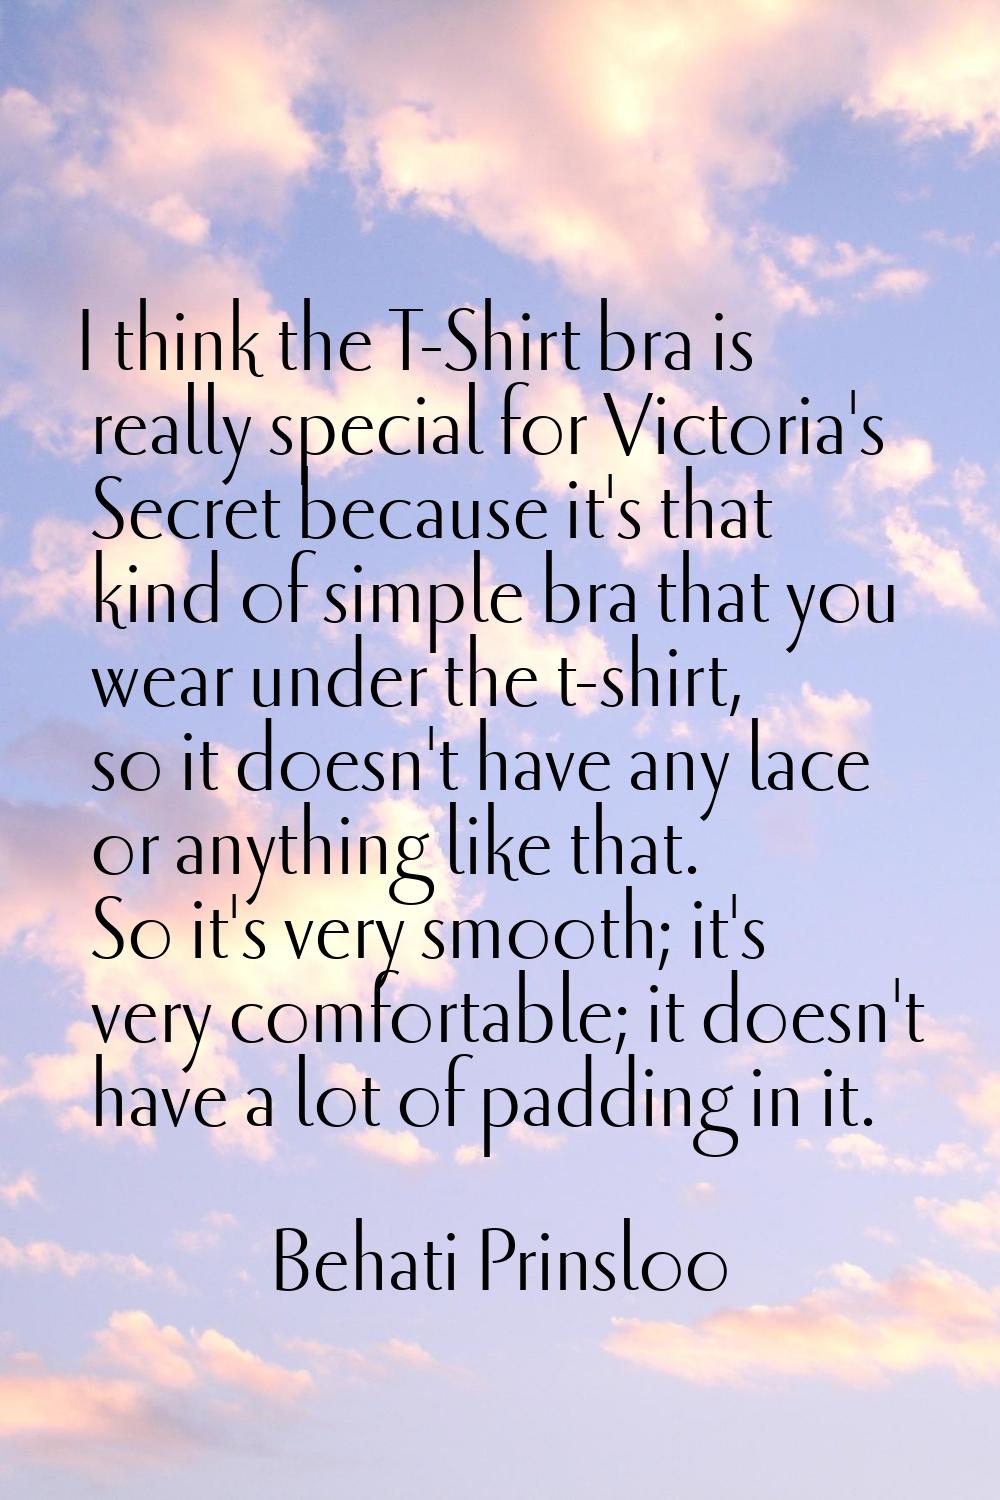 I think the T-Shirt bra is really special for Victoria's Secret because it's that kind of simple br